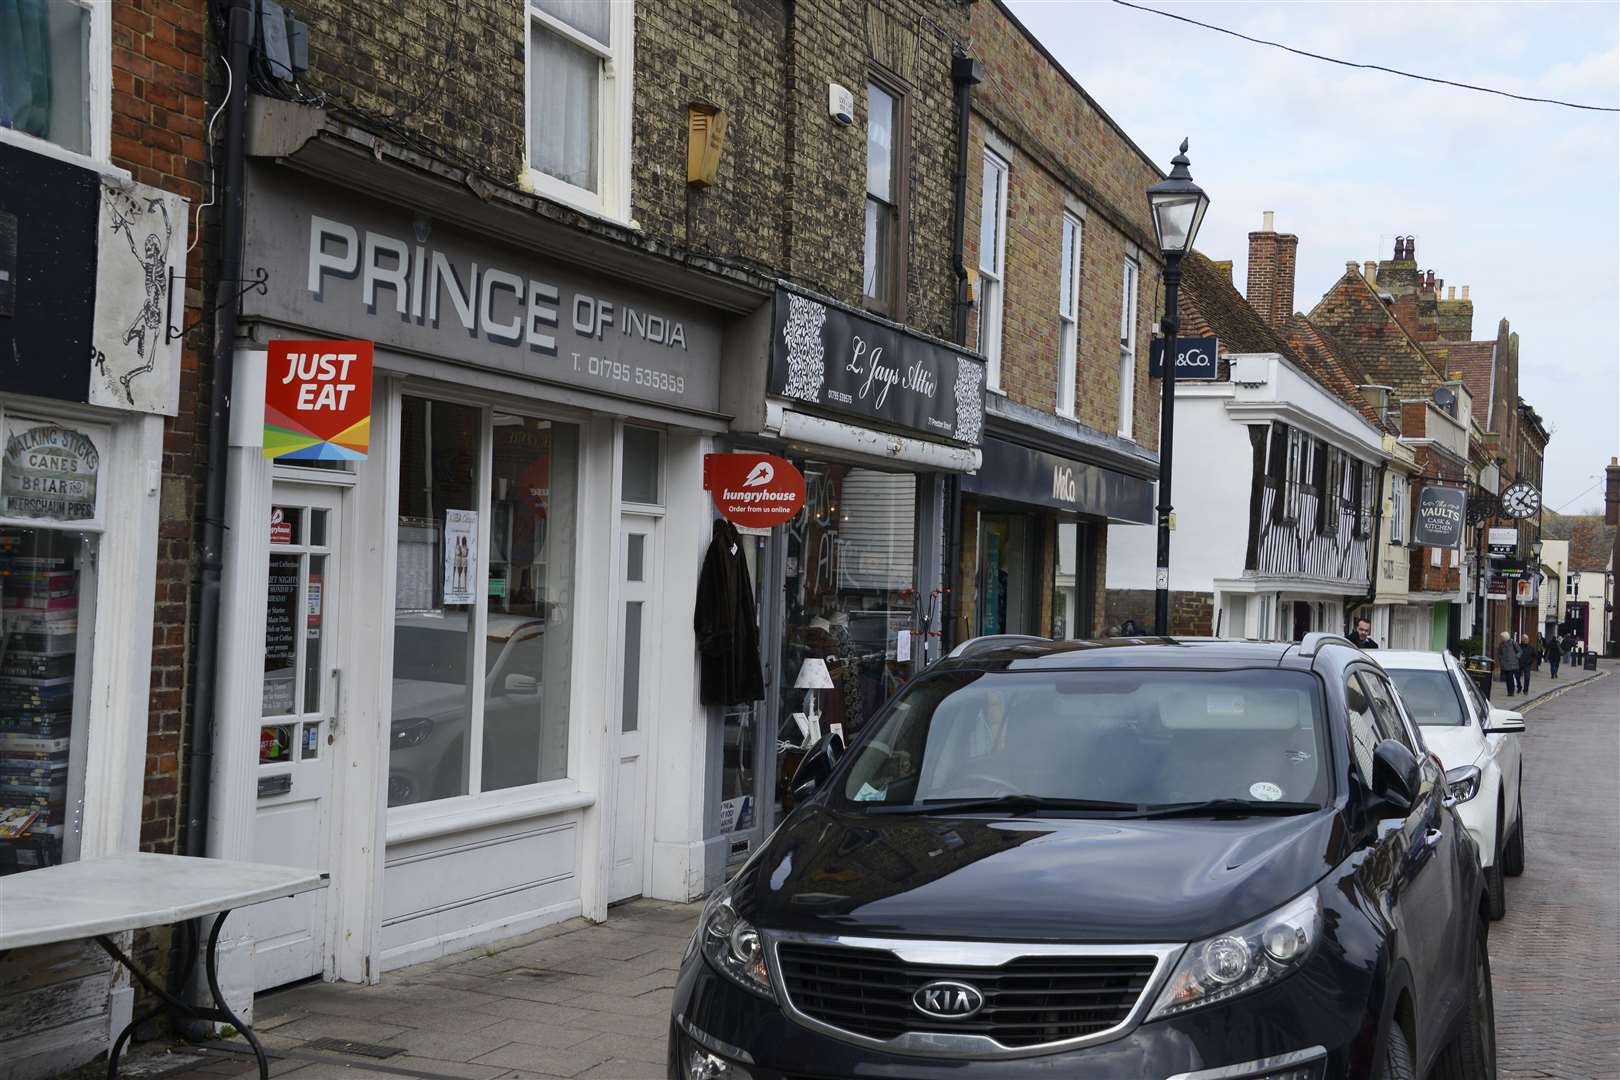 The Prince of India in Faversham is under new ownership